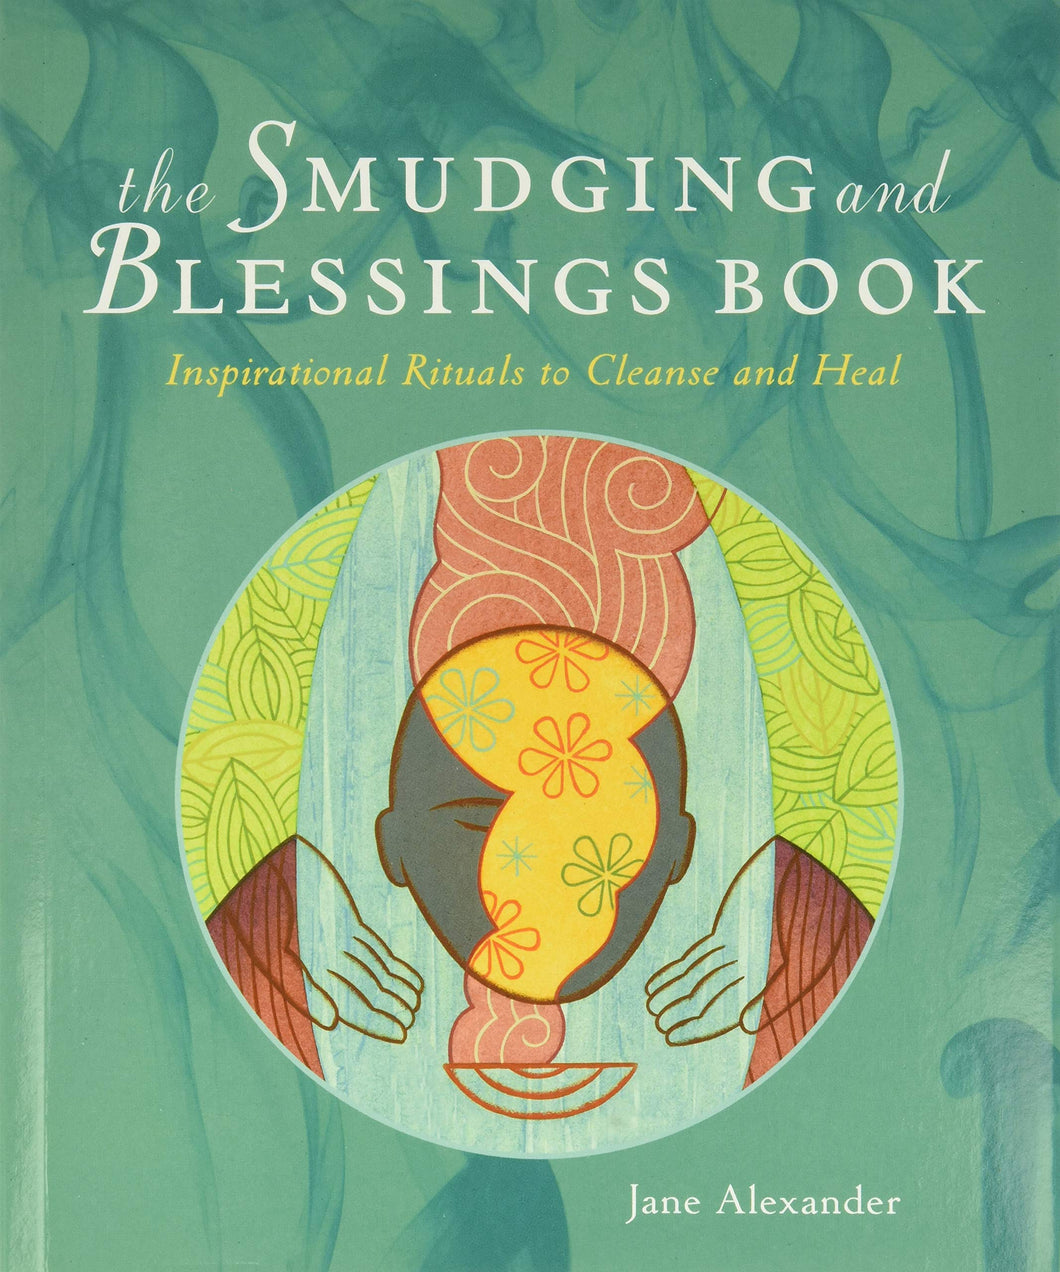 The Smudging and Blessings Book: Inspirational Rituals to Cleanse and Heal [Jane Alexander]